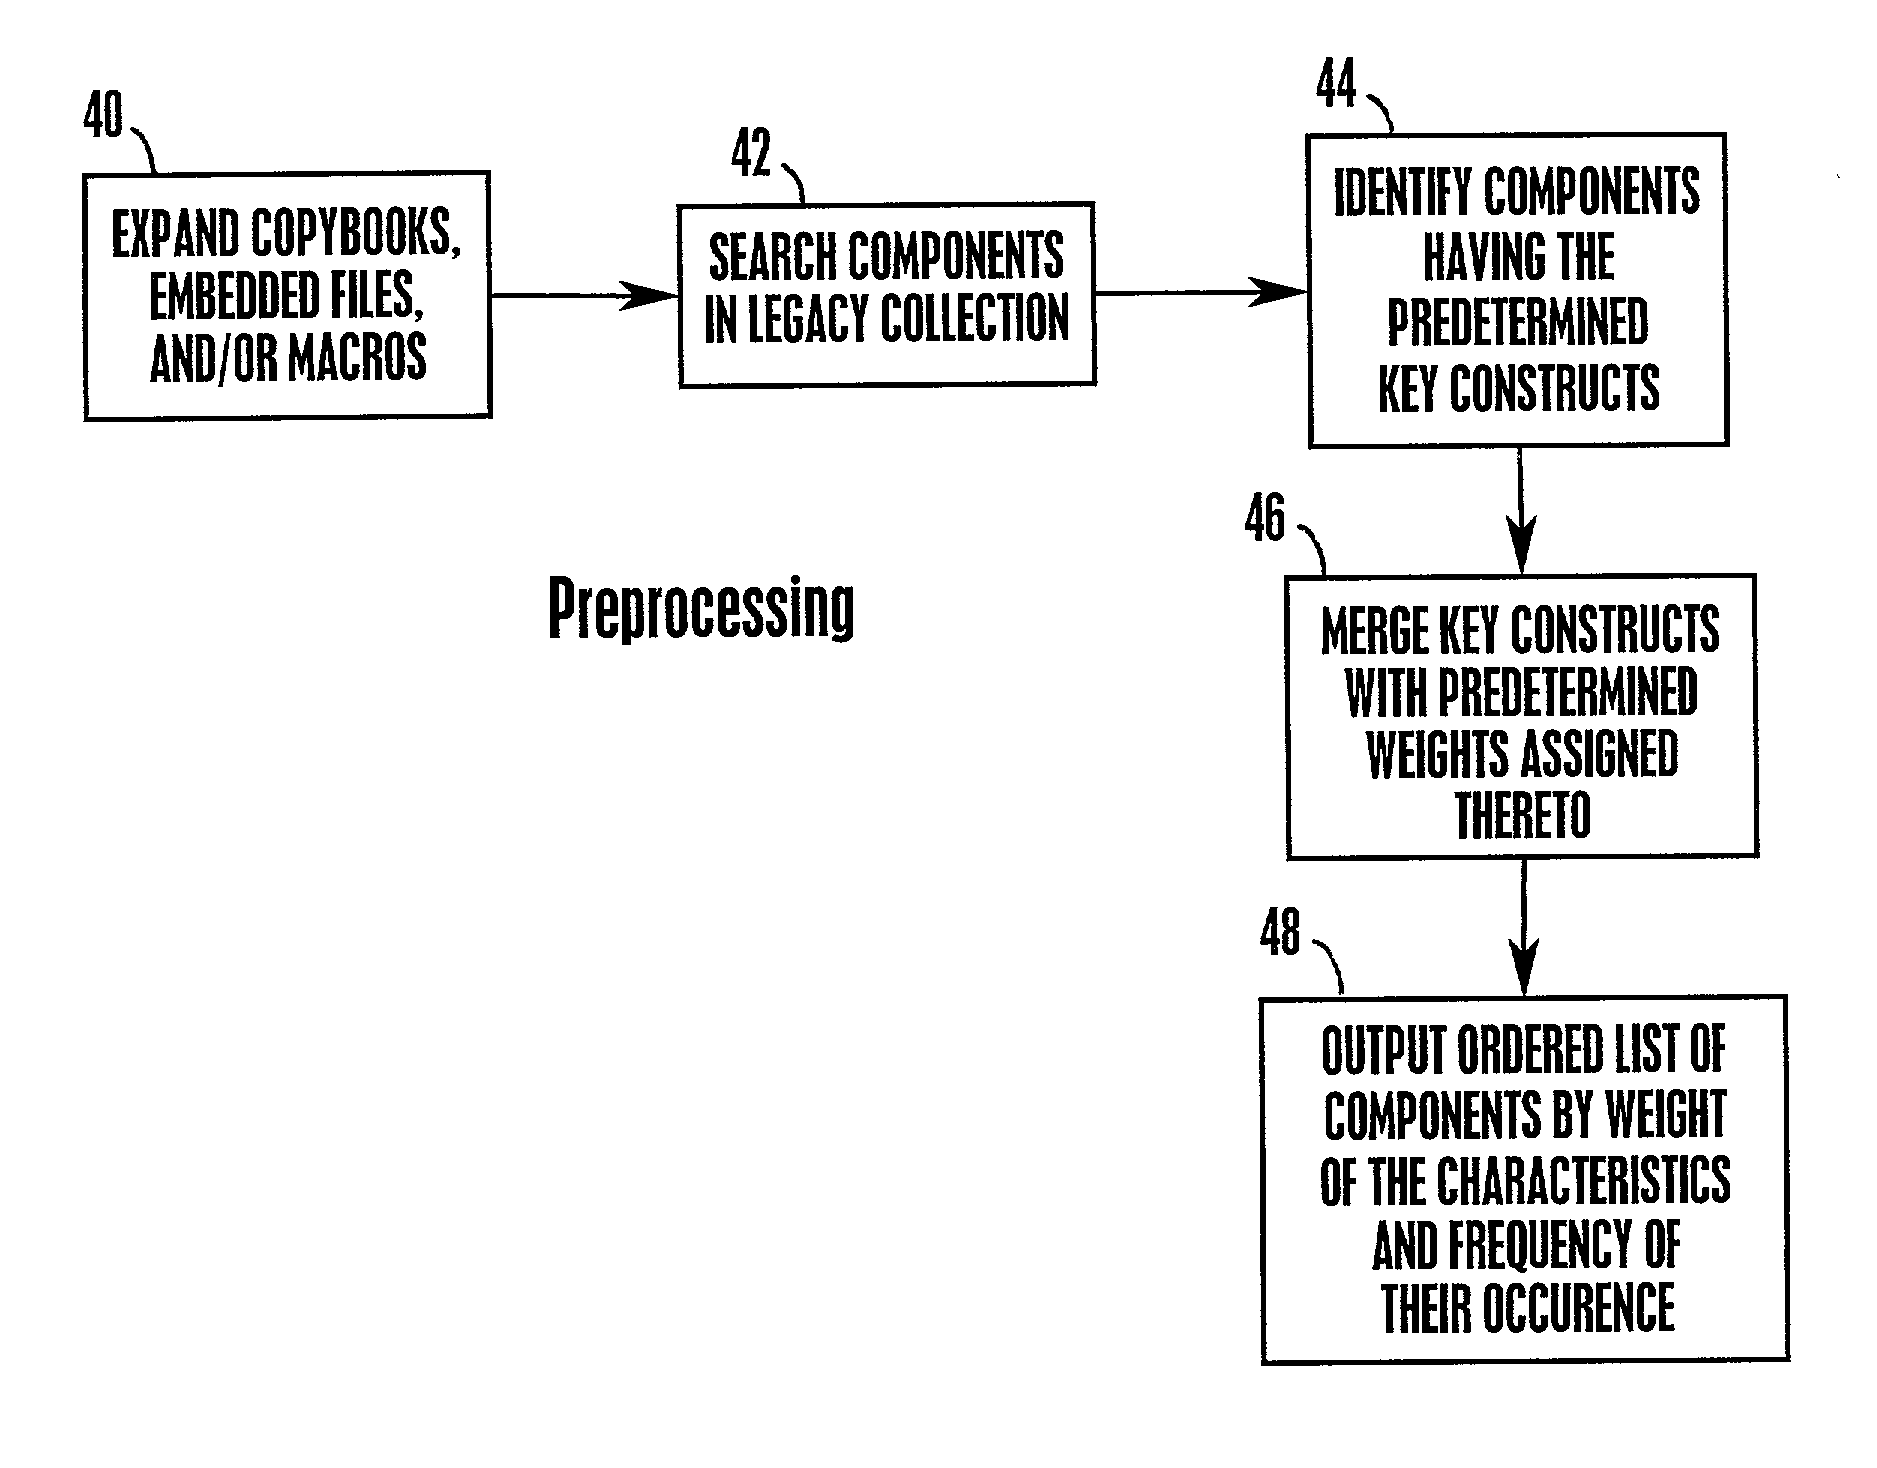 System, method, and computer program product for creating a hierarchy of software components based on the programming constructs therein